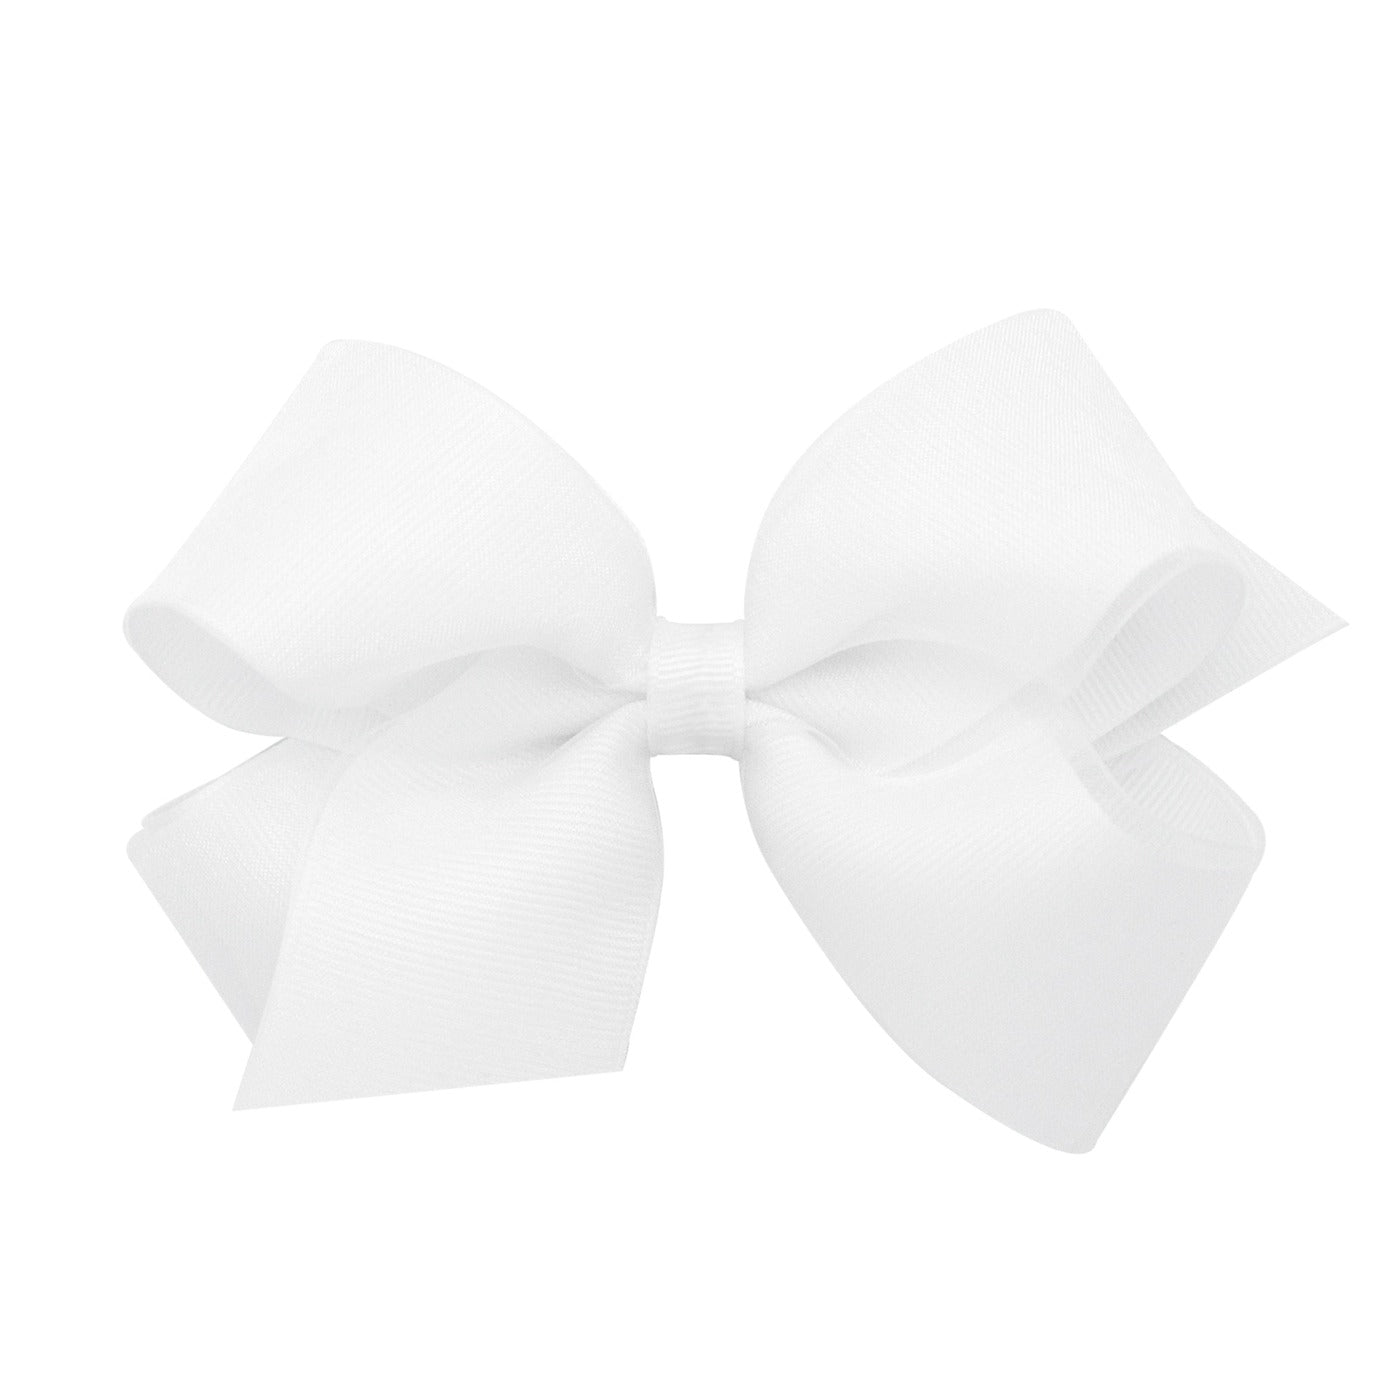 seguridadindustrialcr traditional tiny grosgrain hair bow in white 